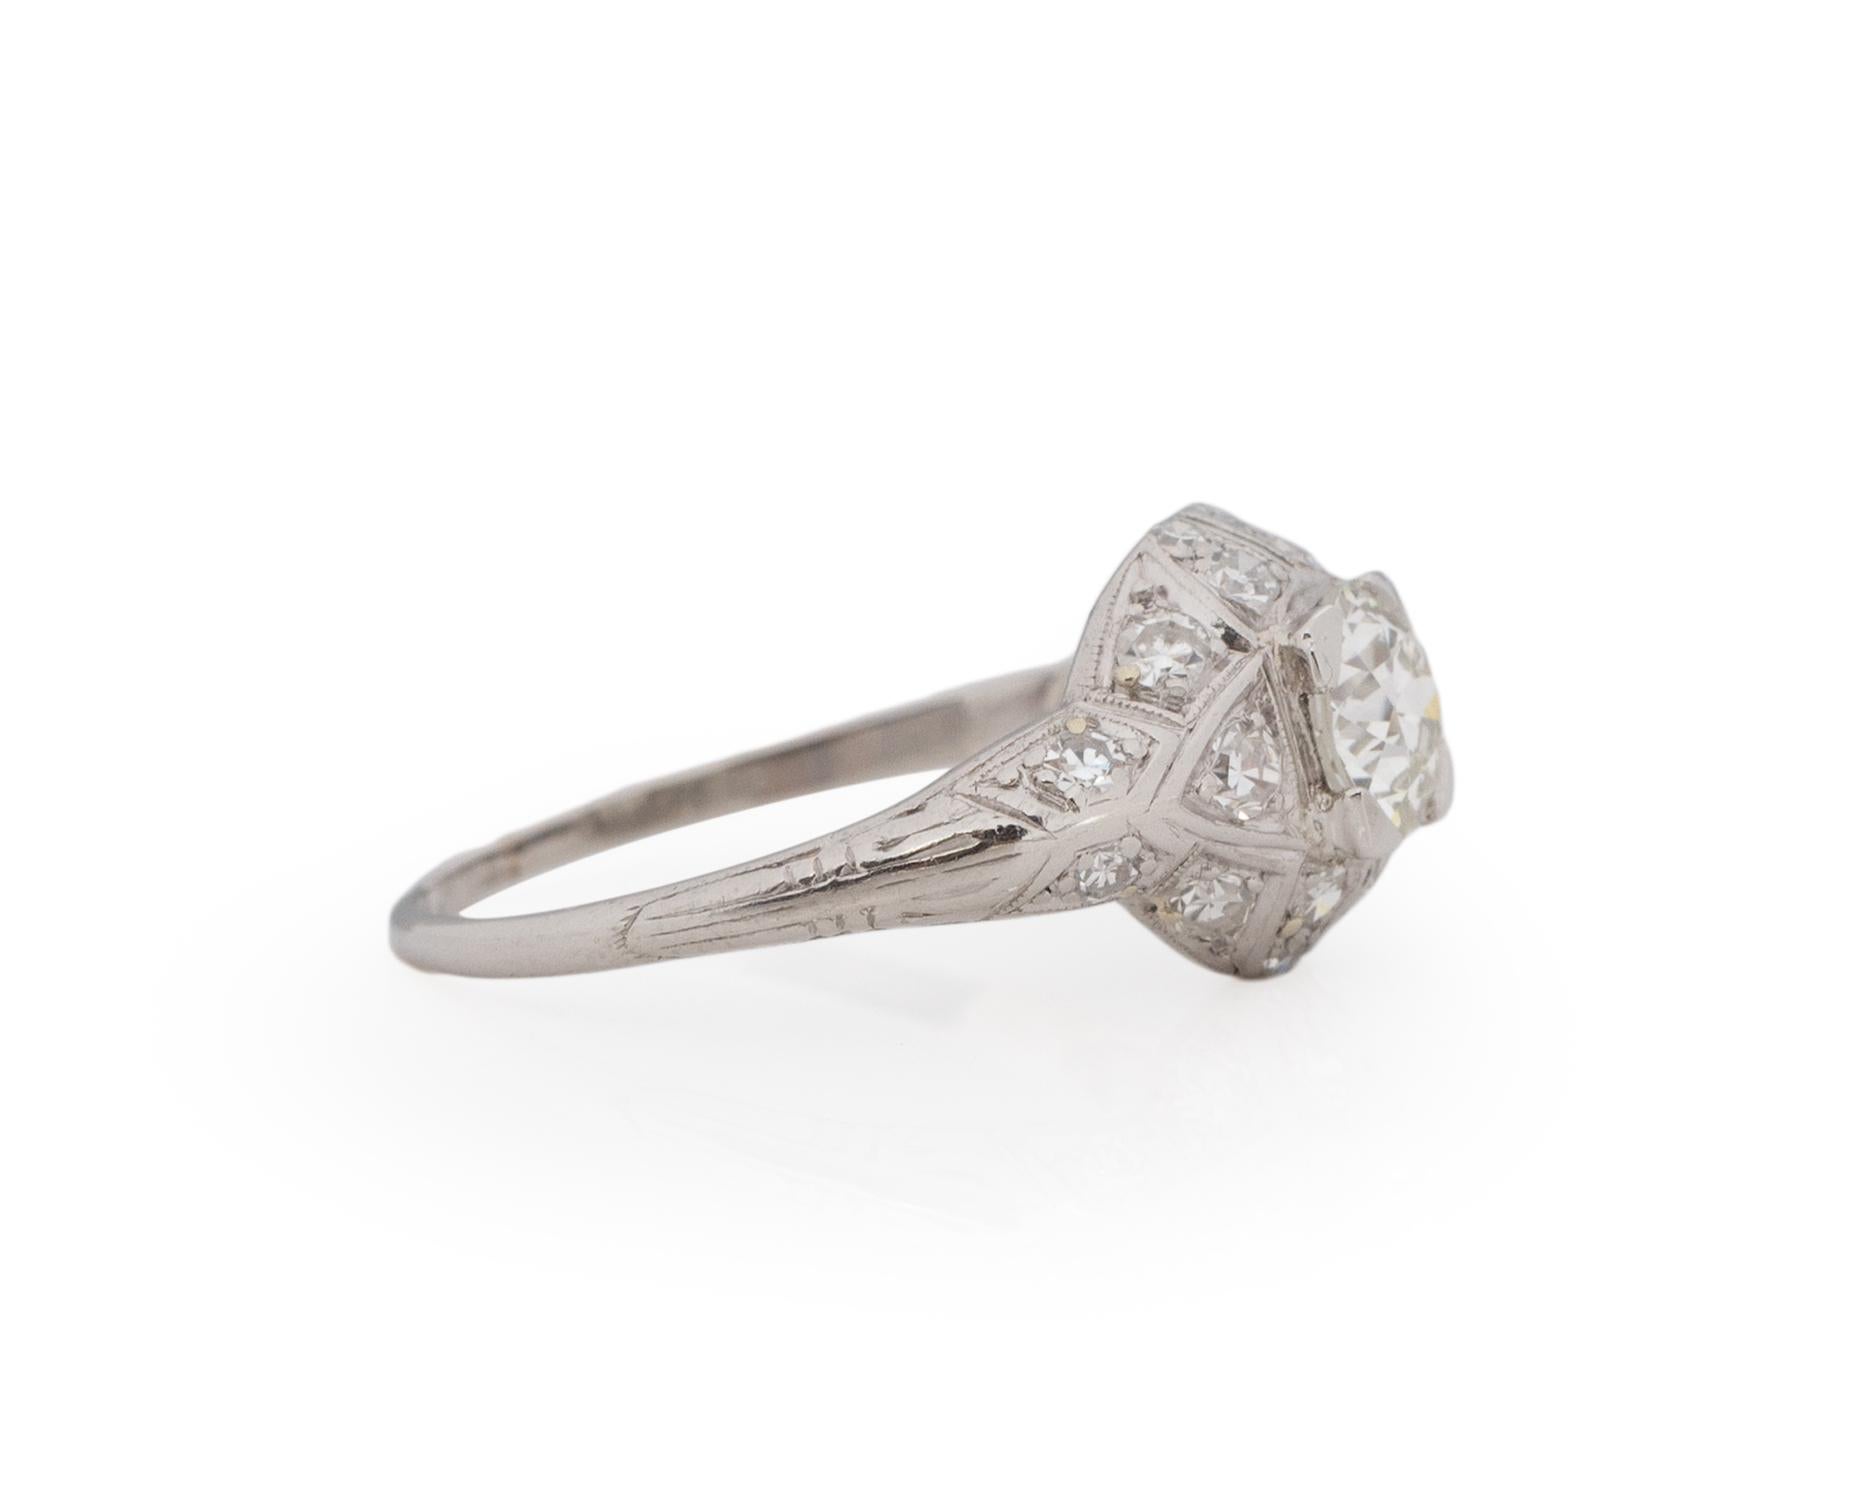 Ring Size: 7.5
Metal Type: Platinum [Hallmarked, and Tested]
Weight: 3.25 grams

Diamond Details:
GIA REPORT #: 5222511665
Weight: .73ct
Cut: Old European brilliant
Color: J
Clarity: SI2
Measurements: 5.64mm x 5.66mm x 3.58mm

Finger to Top of Stone